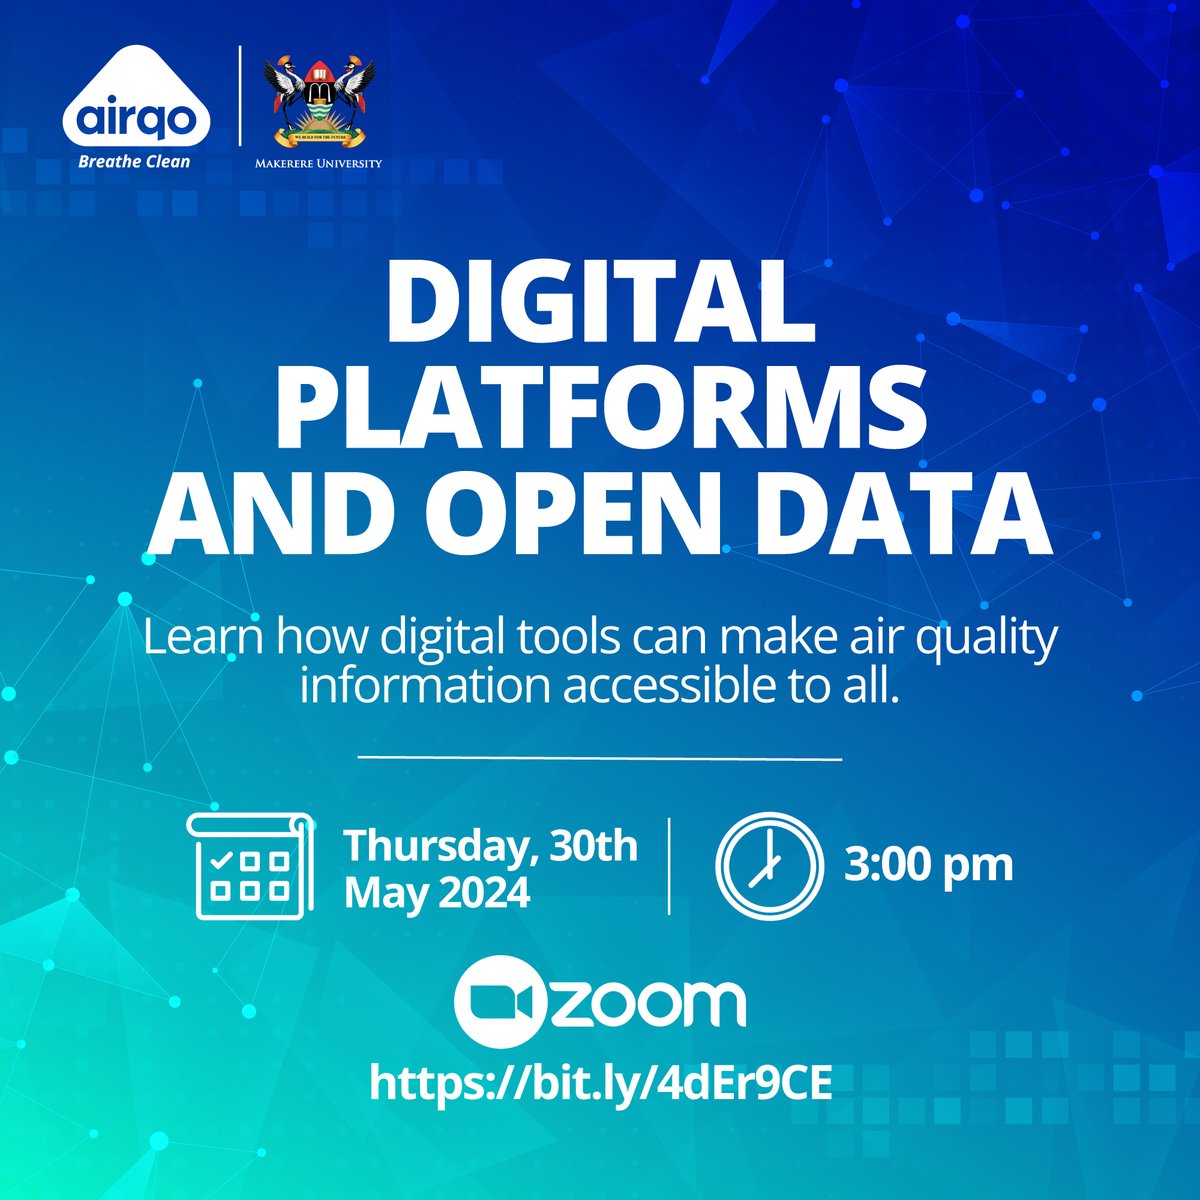 📢Save the Date! Join us for the upcoming #webinar on “Digital platforms and Open data'. Learn how we are democratizing access to crucial #AirQuality information using digital tools. 🗓️30th May ⏲️3pm Register here> bit.ly/4dEr9CE #CleanAir #DigitalPlatform #OpenData